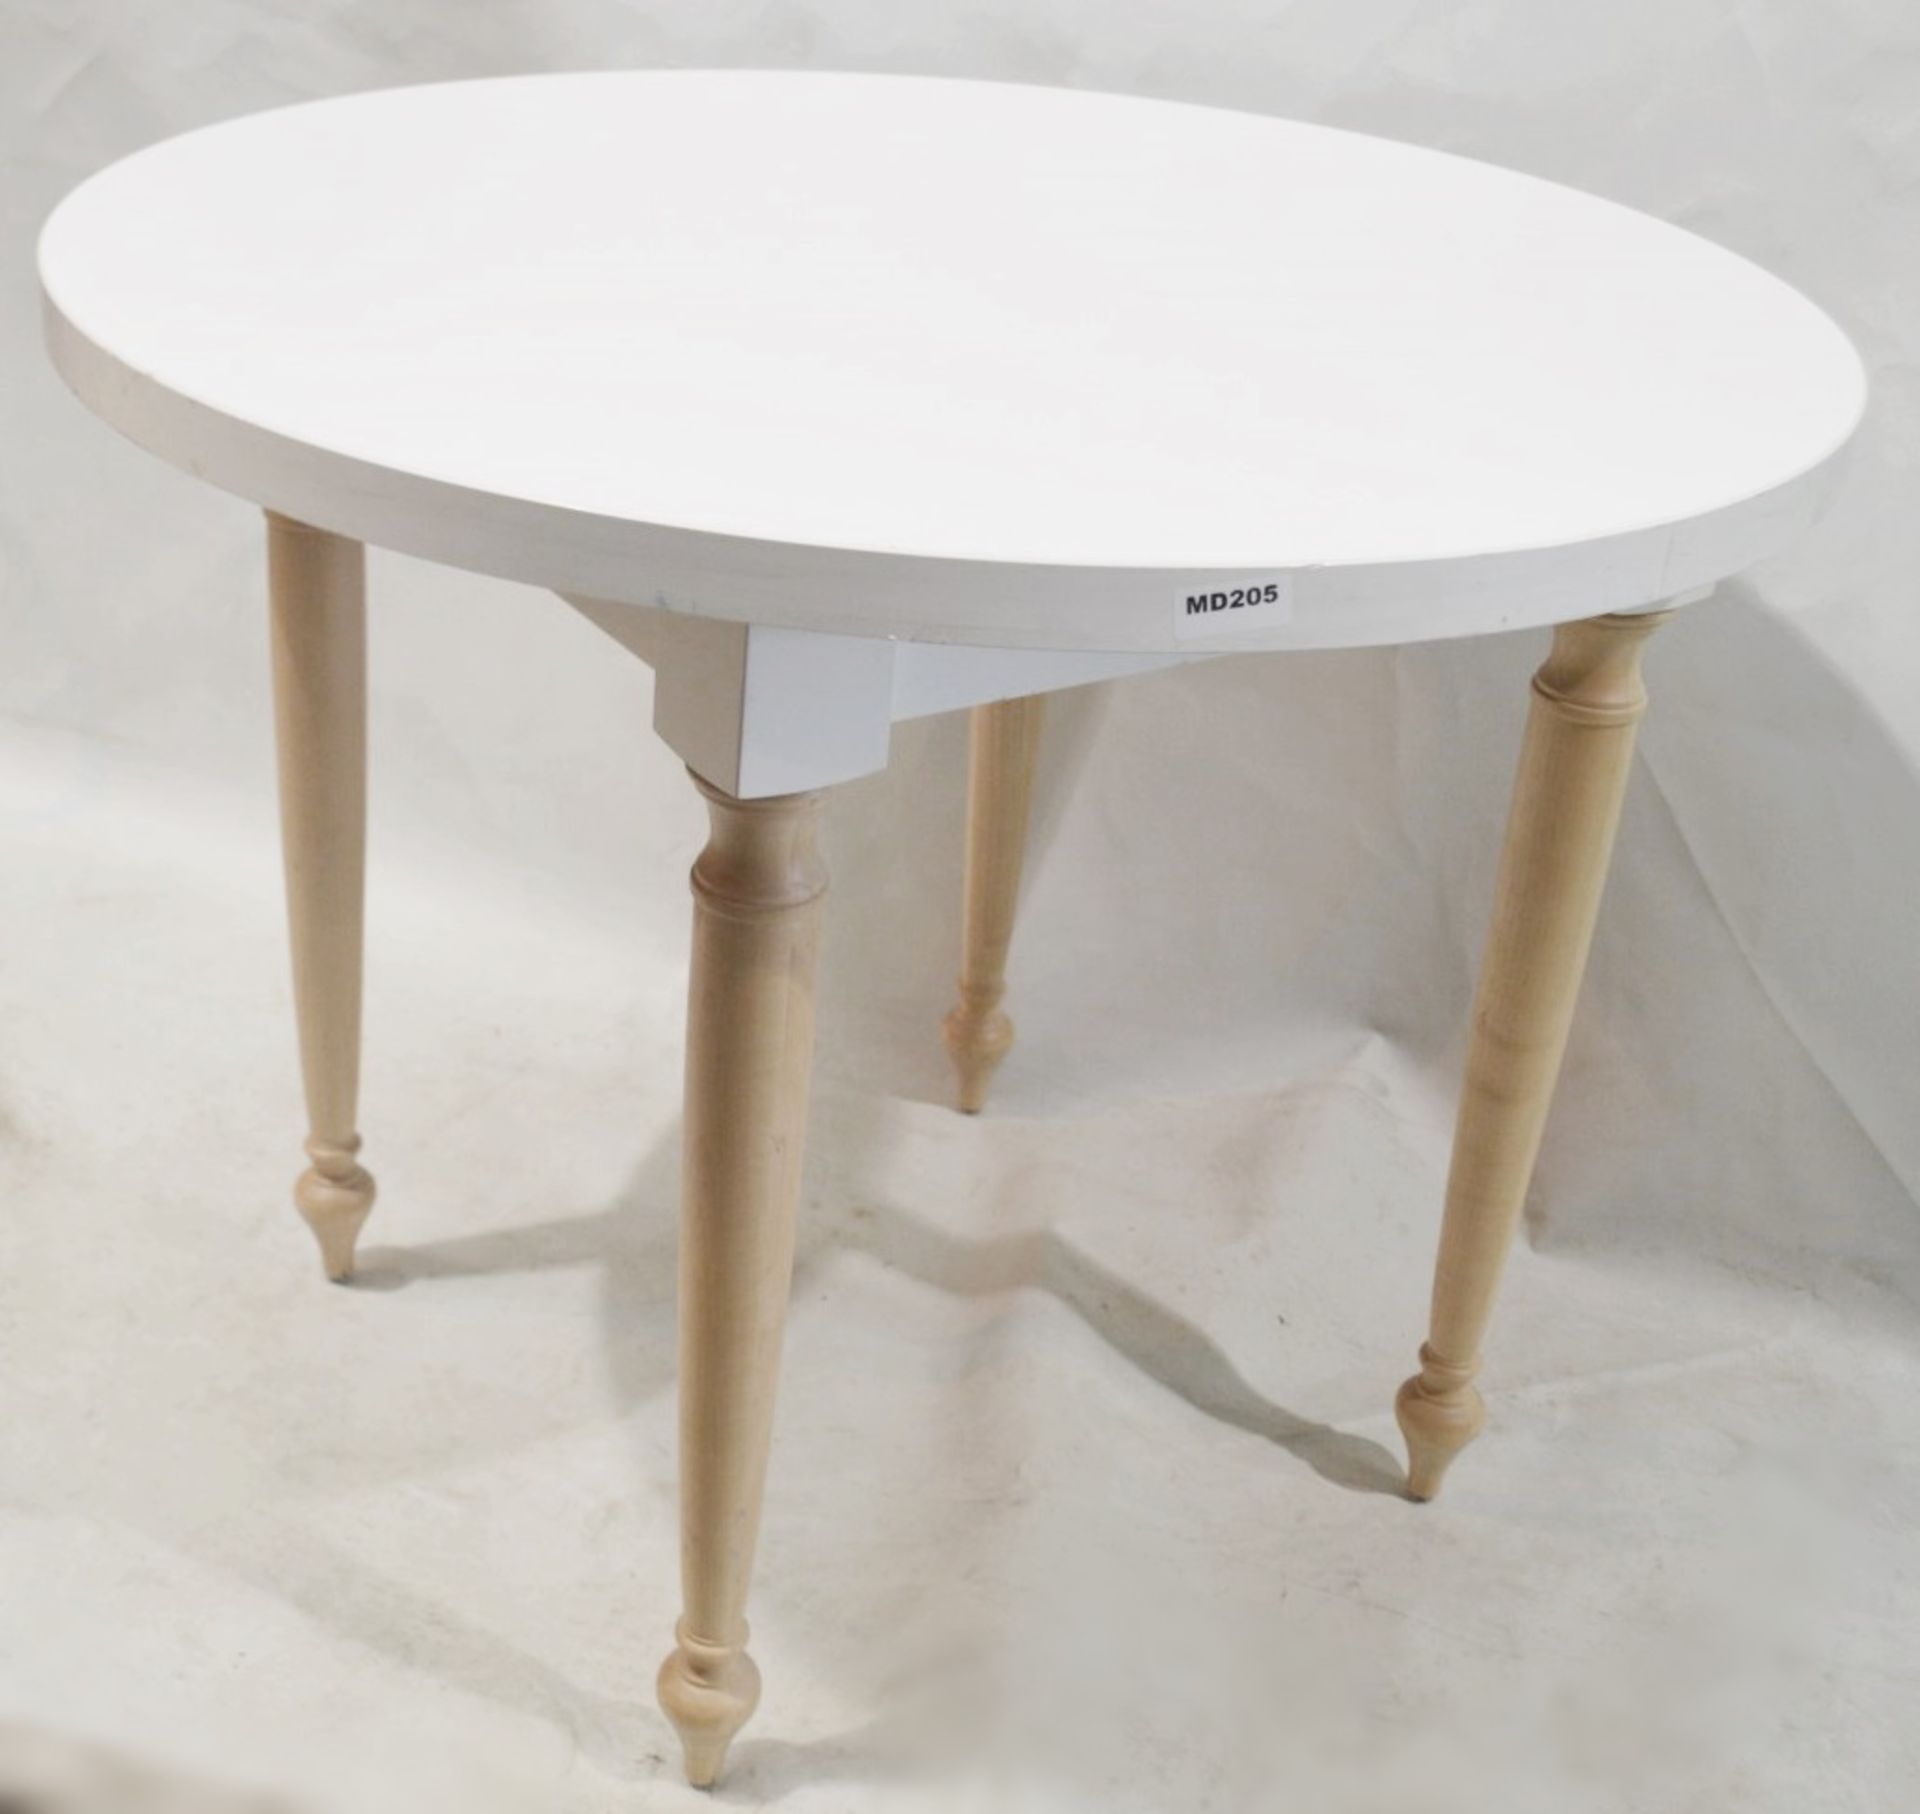 3 x Round Event Tables - Each Features Attractive Turned Legs In Beech Wood - Ex-Display - Image 4 of 4